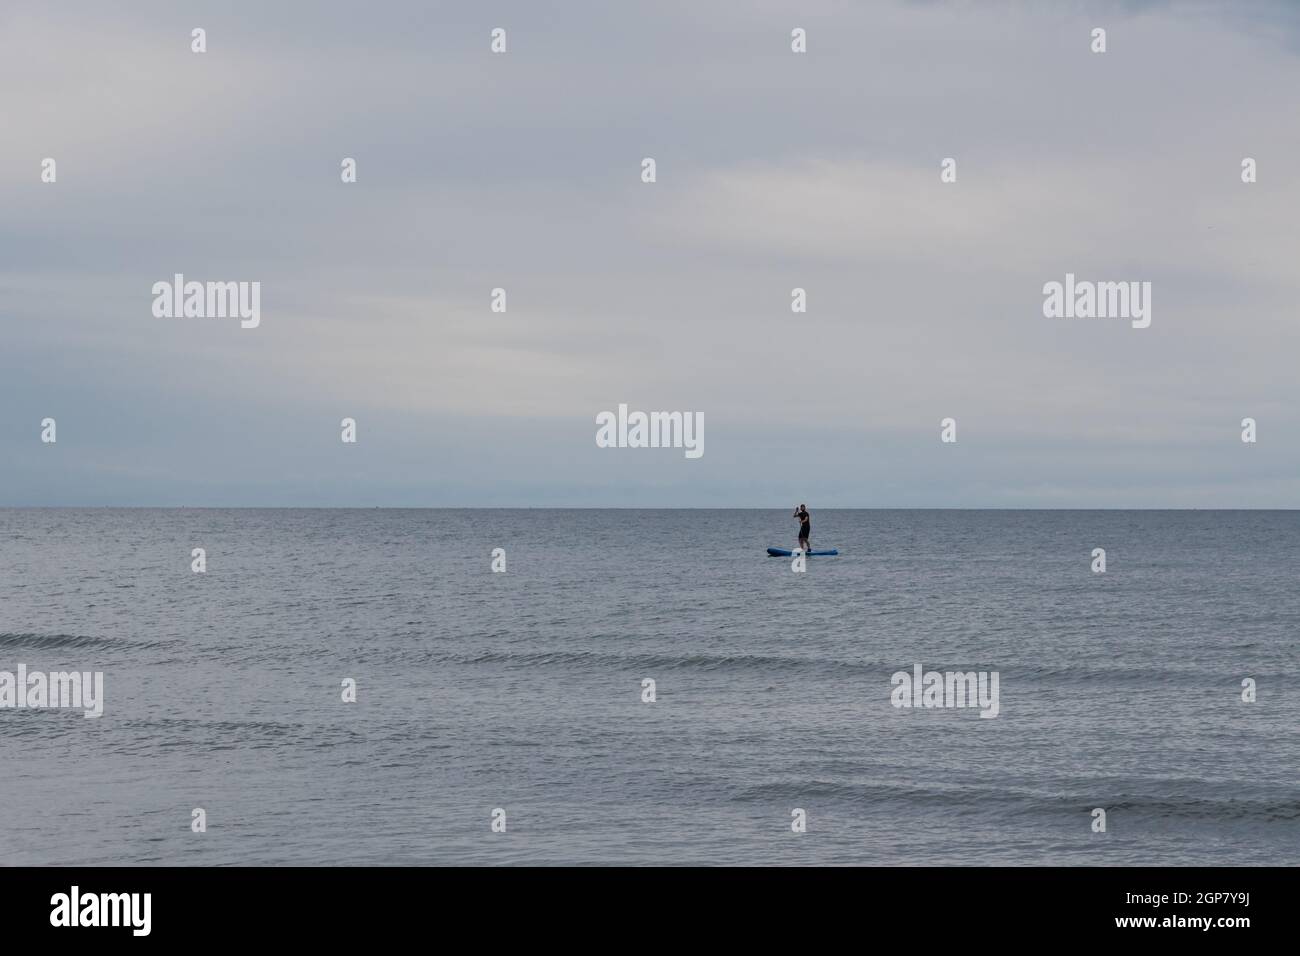 A paddle boarder at sea Stock Photo